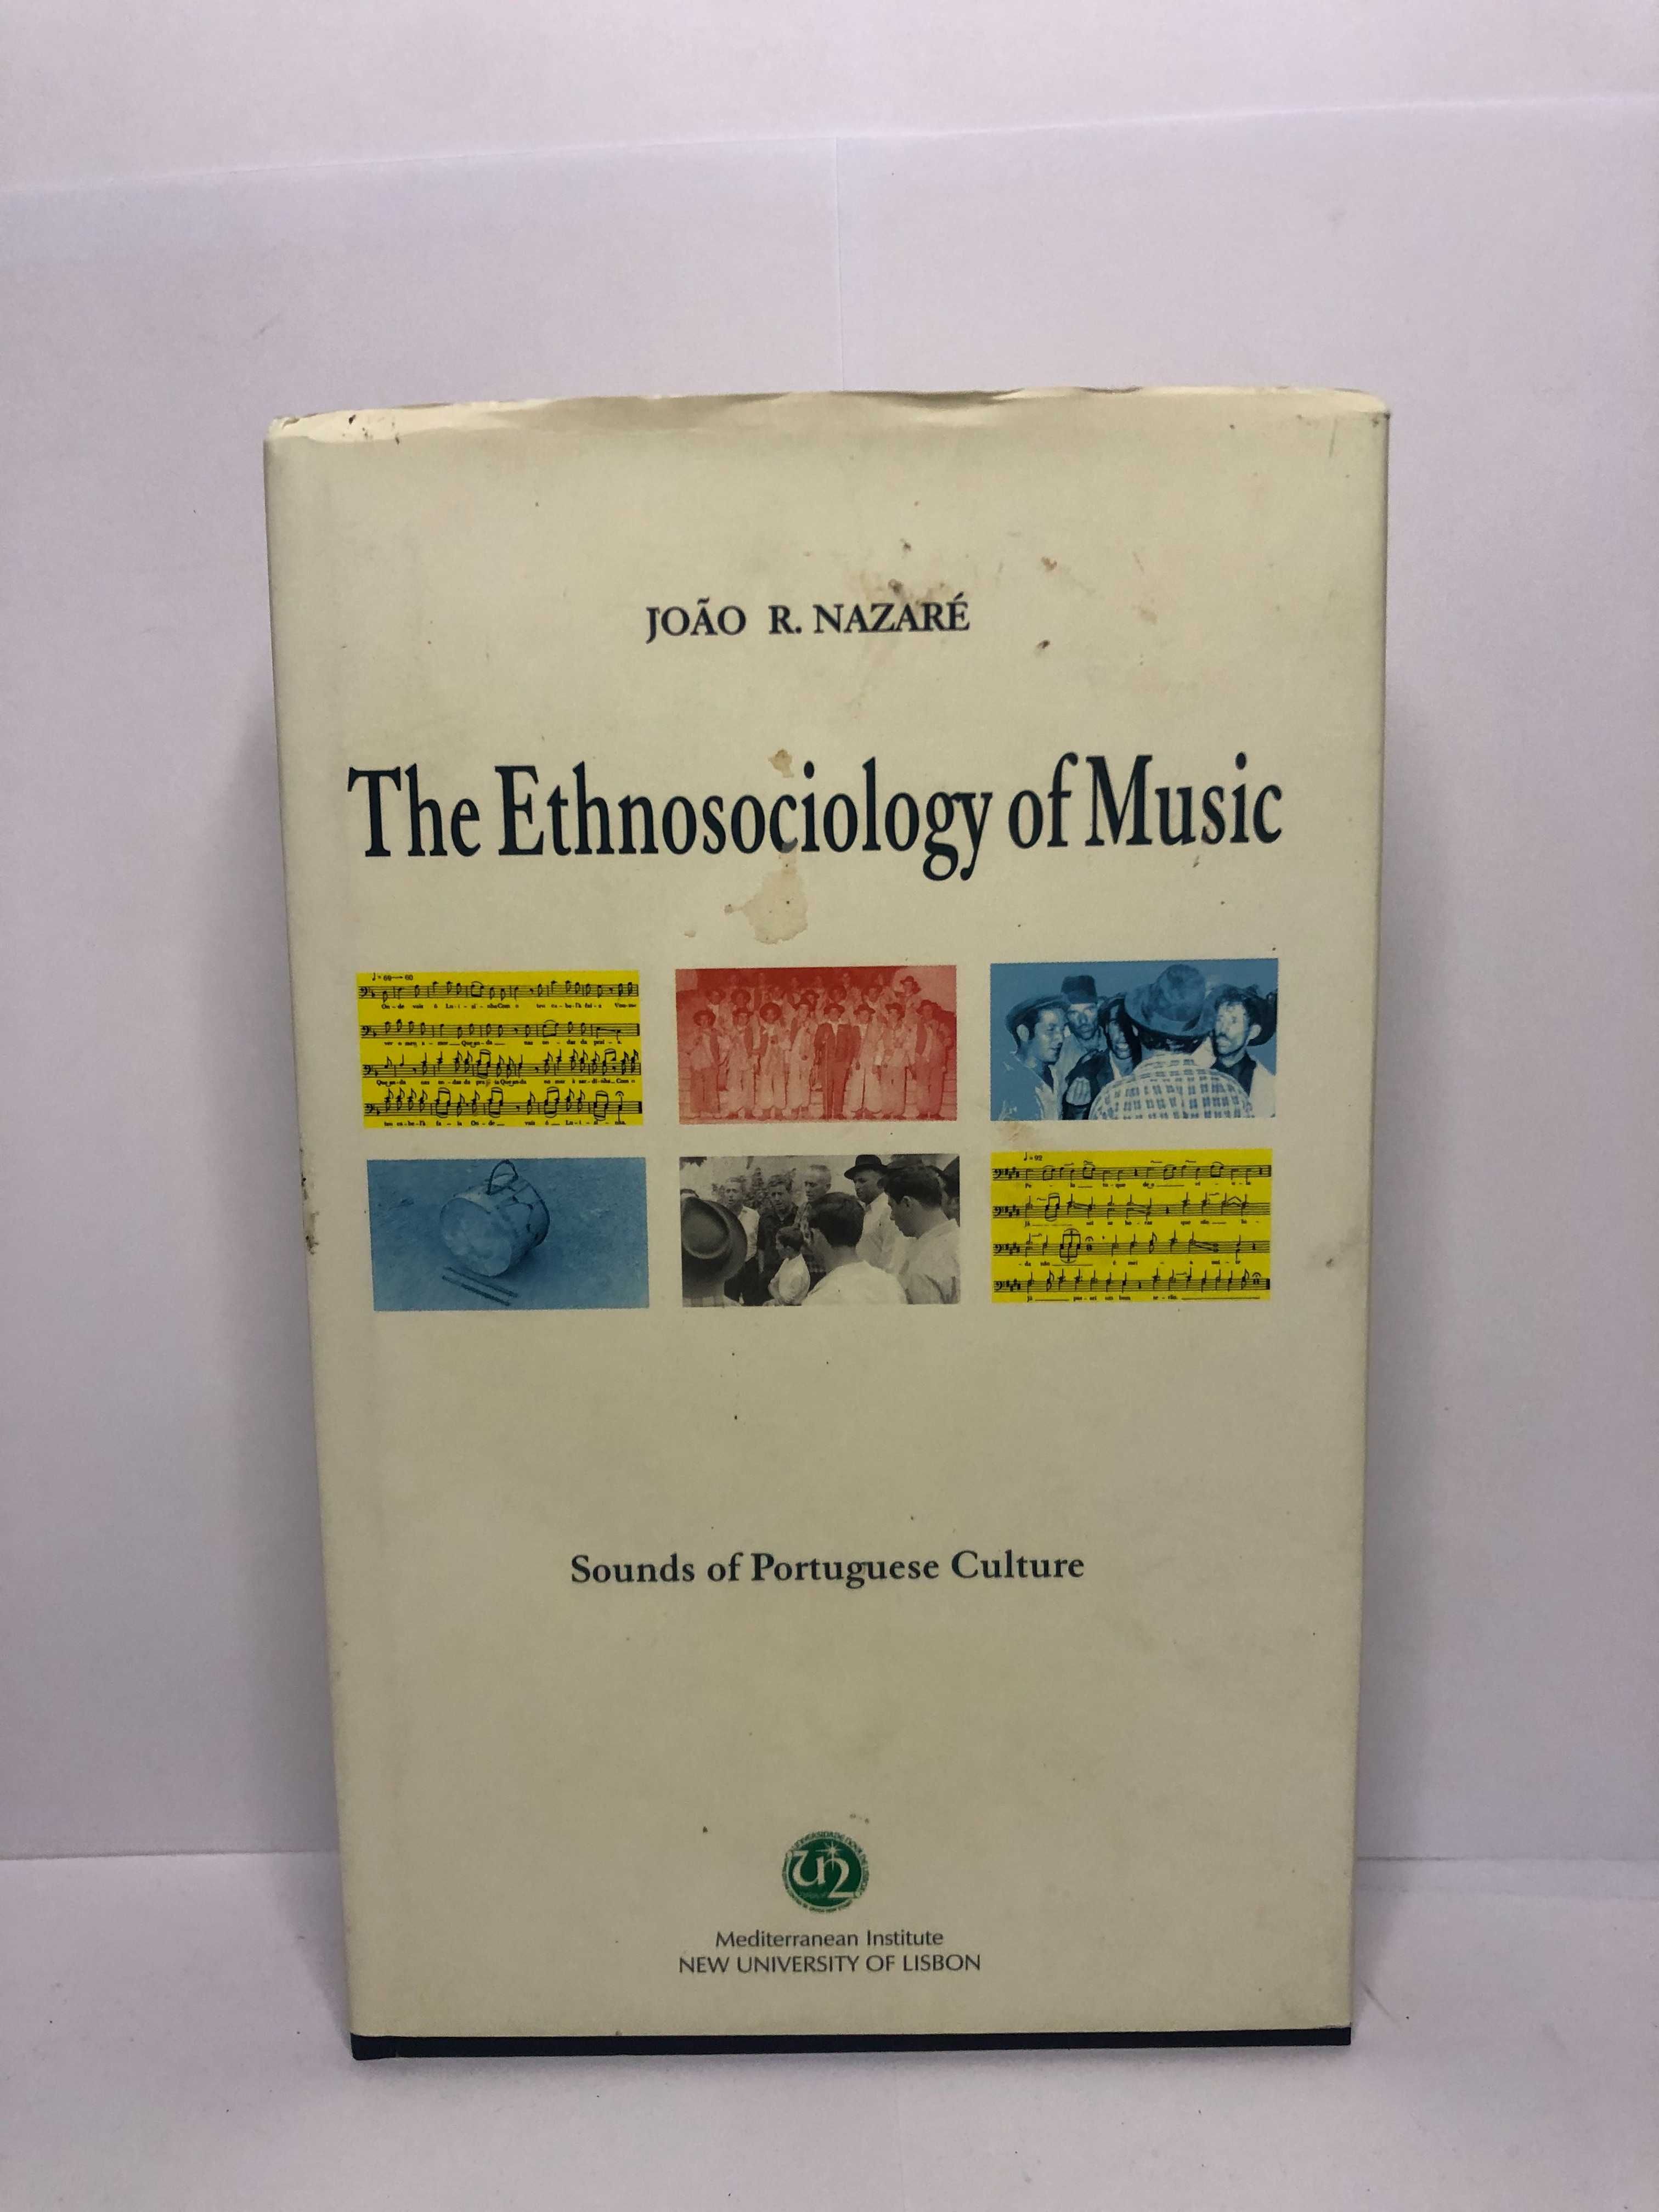 The Ethnosociology of Music (Sounds of Portuguese Culture)